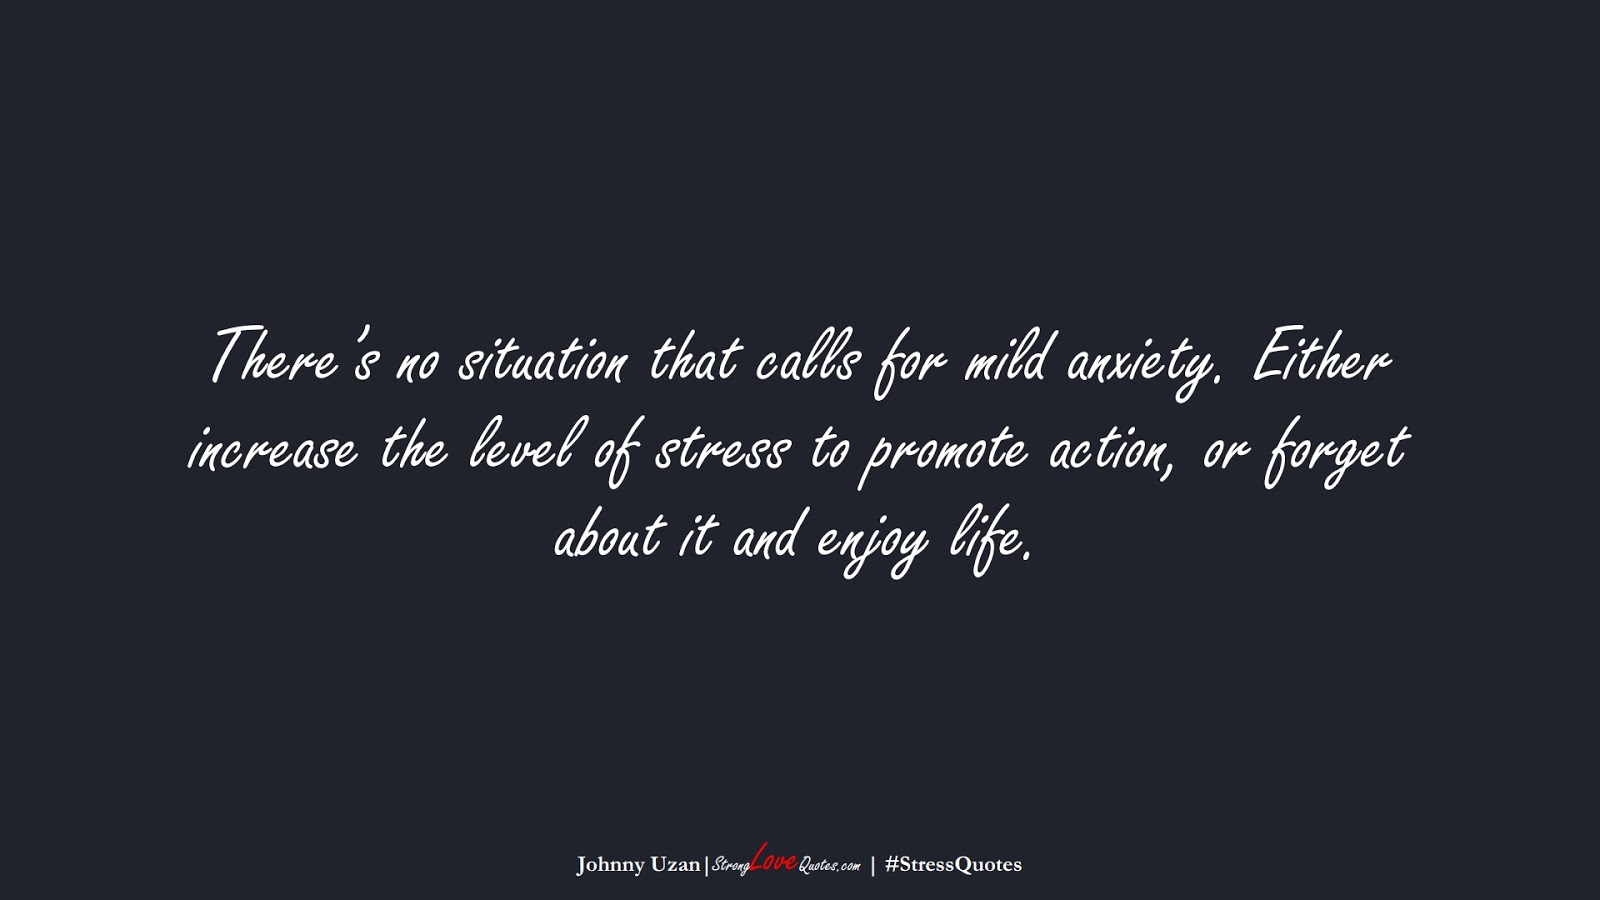 There’s no situation that calls for mild anxiety. Either increase the level of stress to promote action, or forget about it and enjoy life. (Johnny Uzan);  #StressQuotes